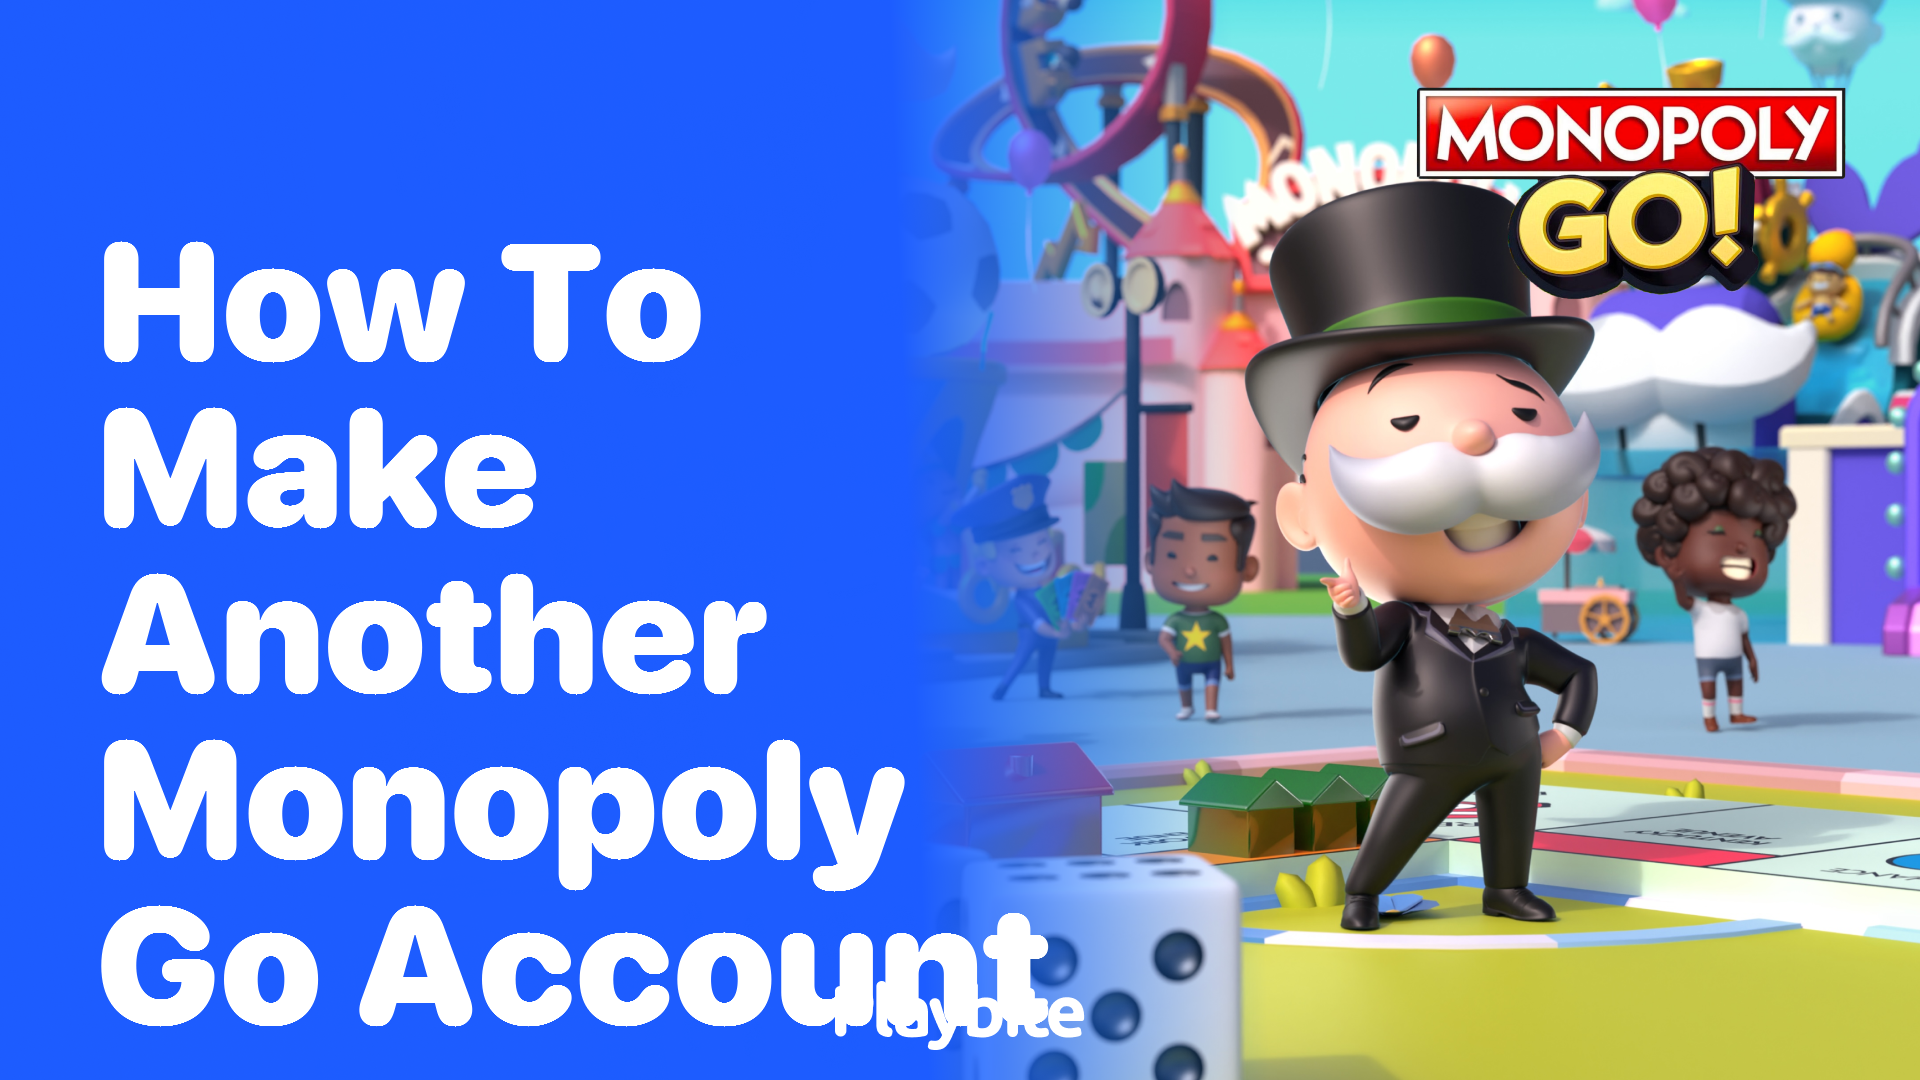 How to Create Another Monopoly Go Account